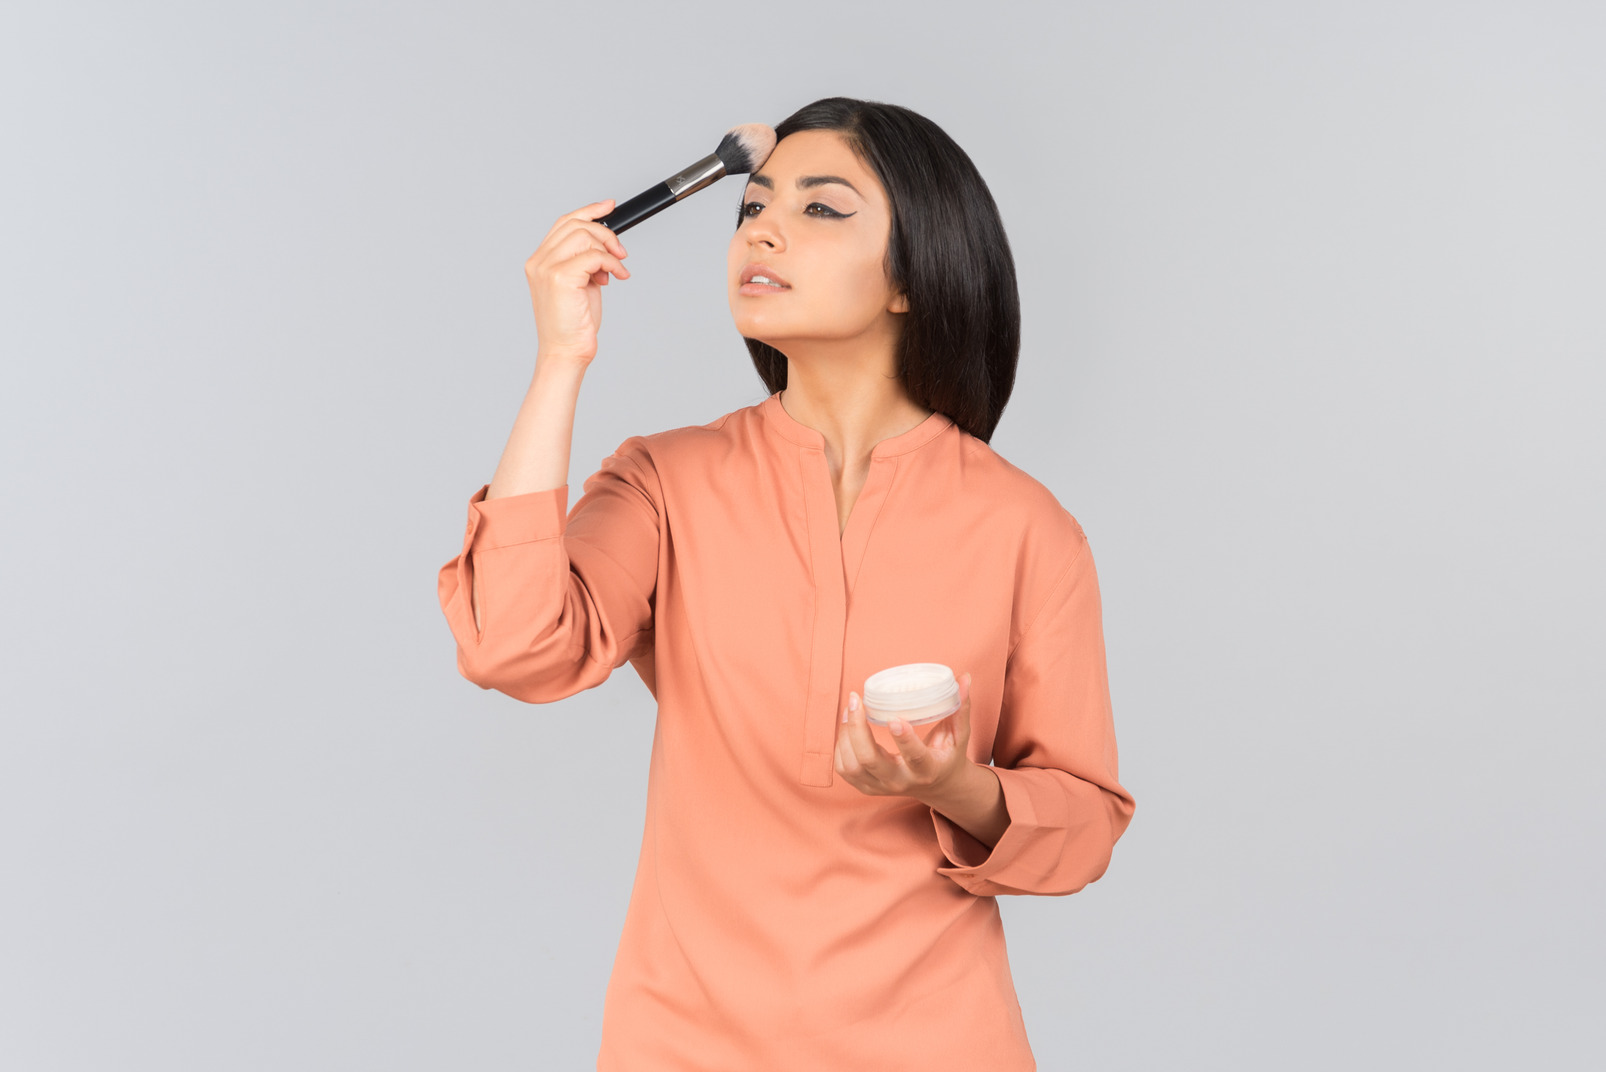 Indian woman applying face powder on her forehead